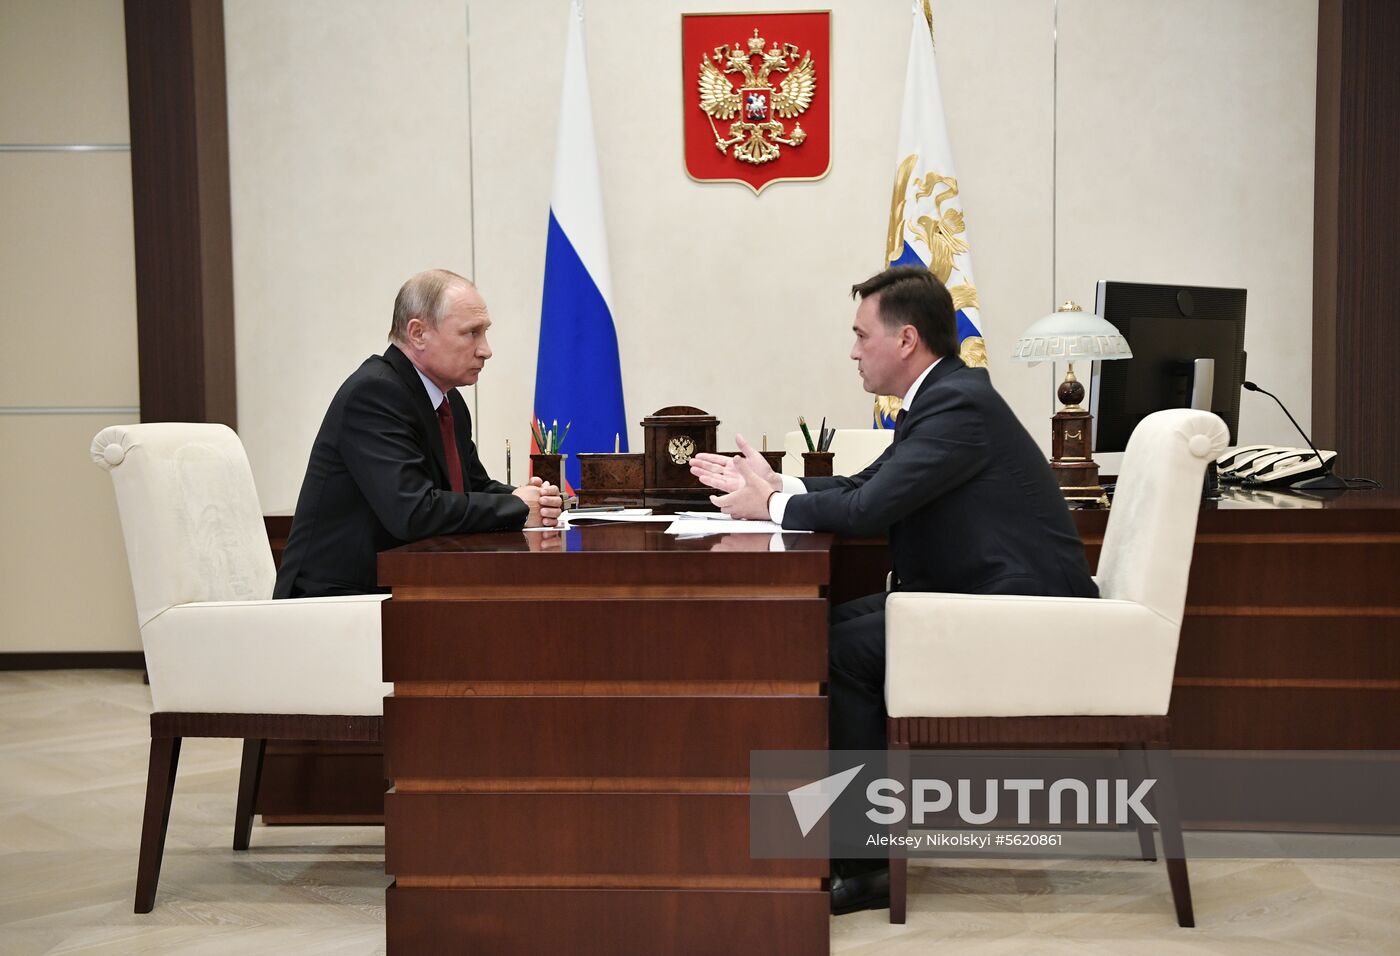 Russian President Vladimir Putin meets with Moscow Region Governor Andrei Vorobyov